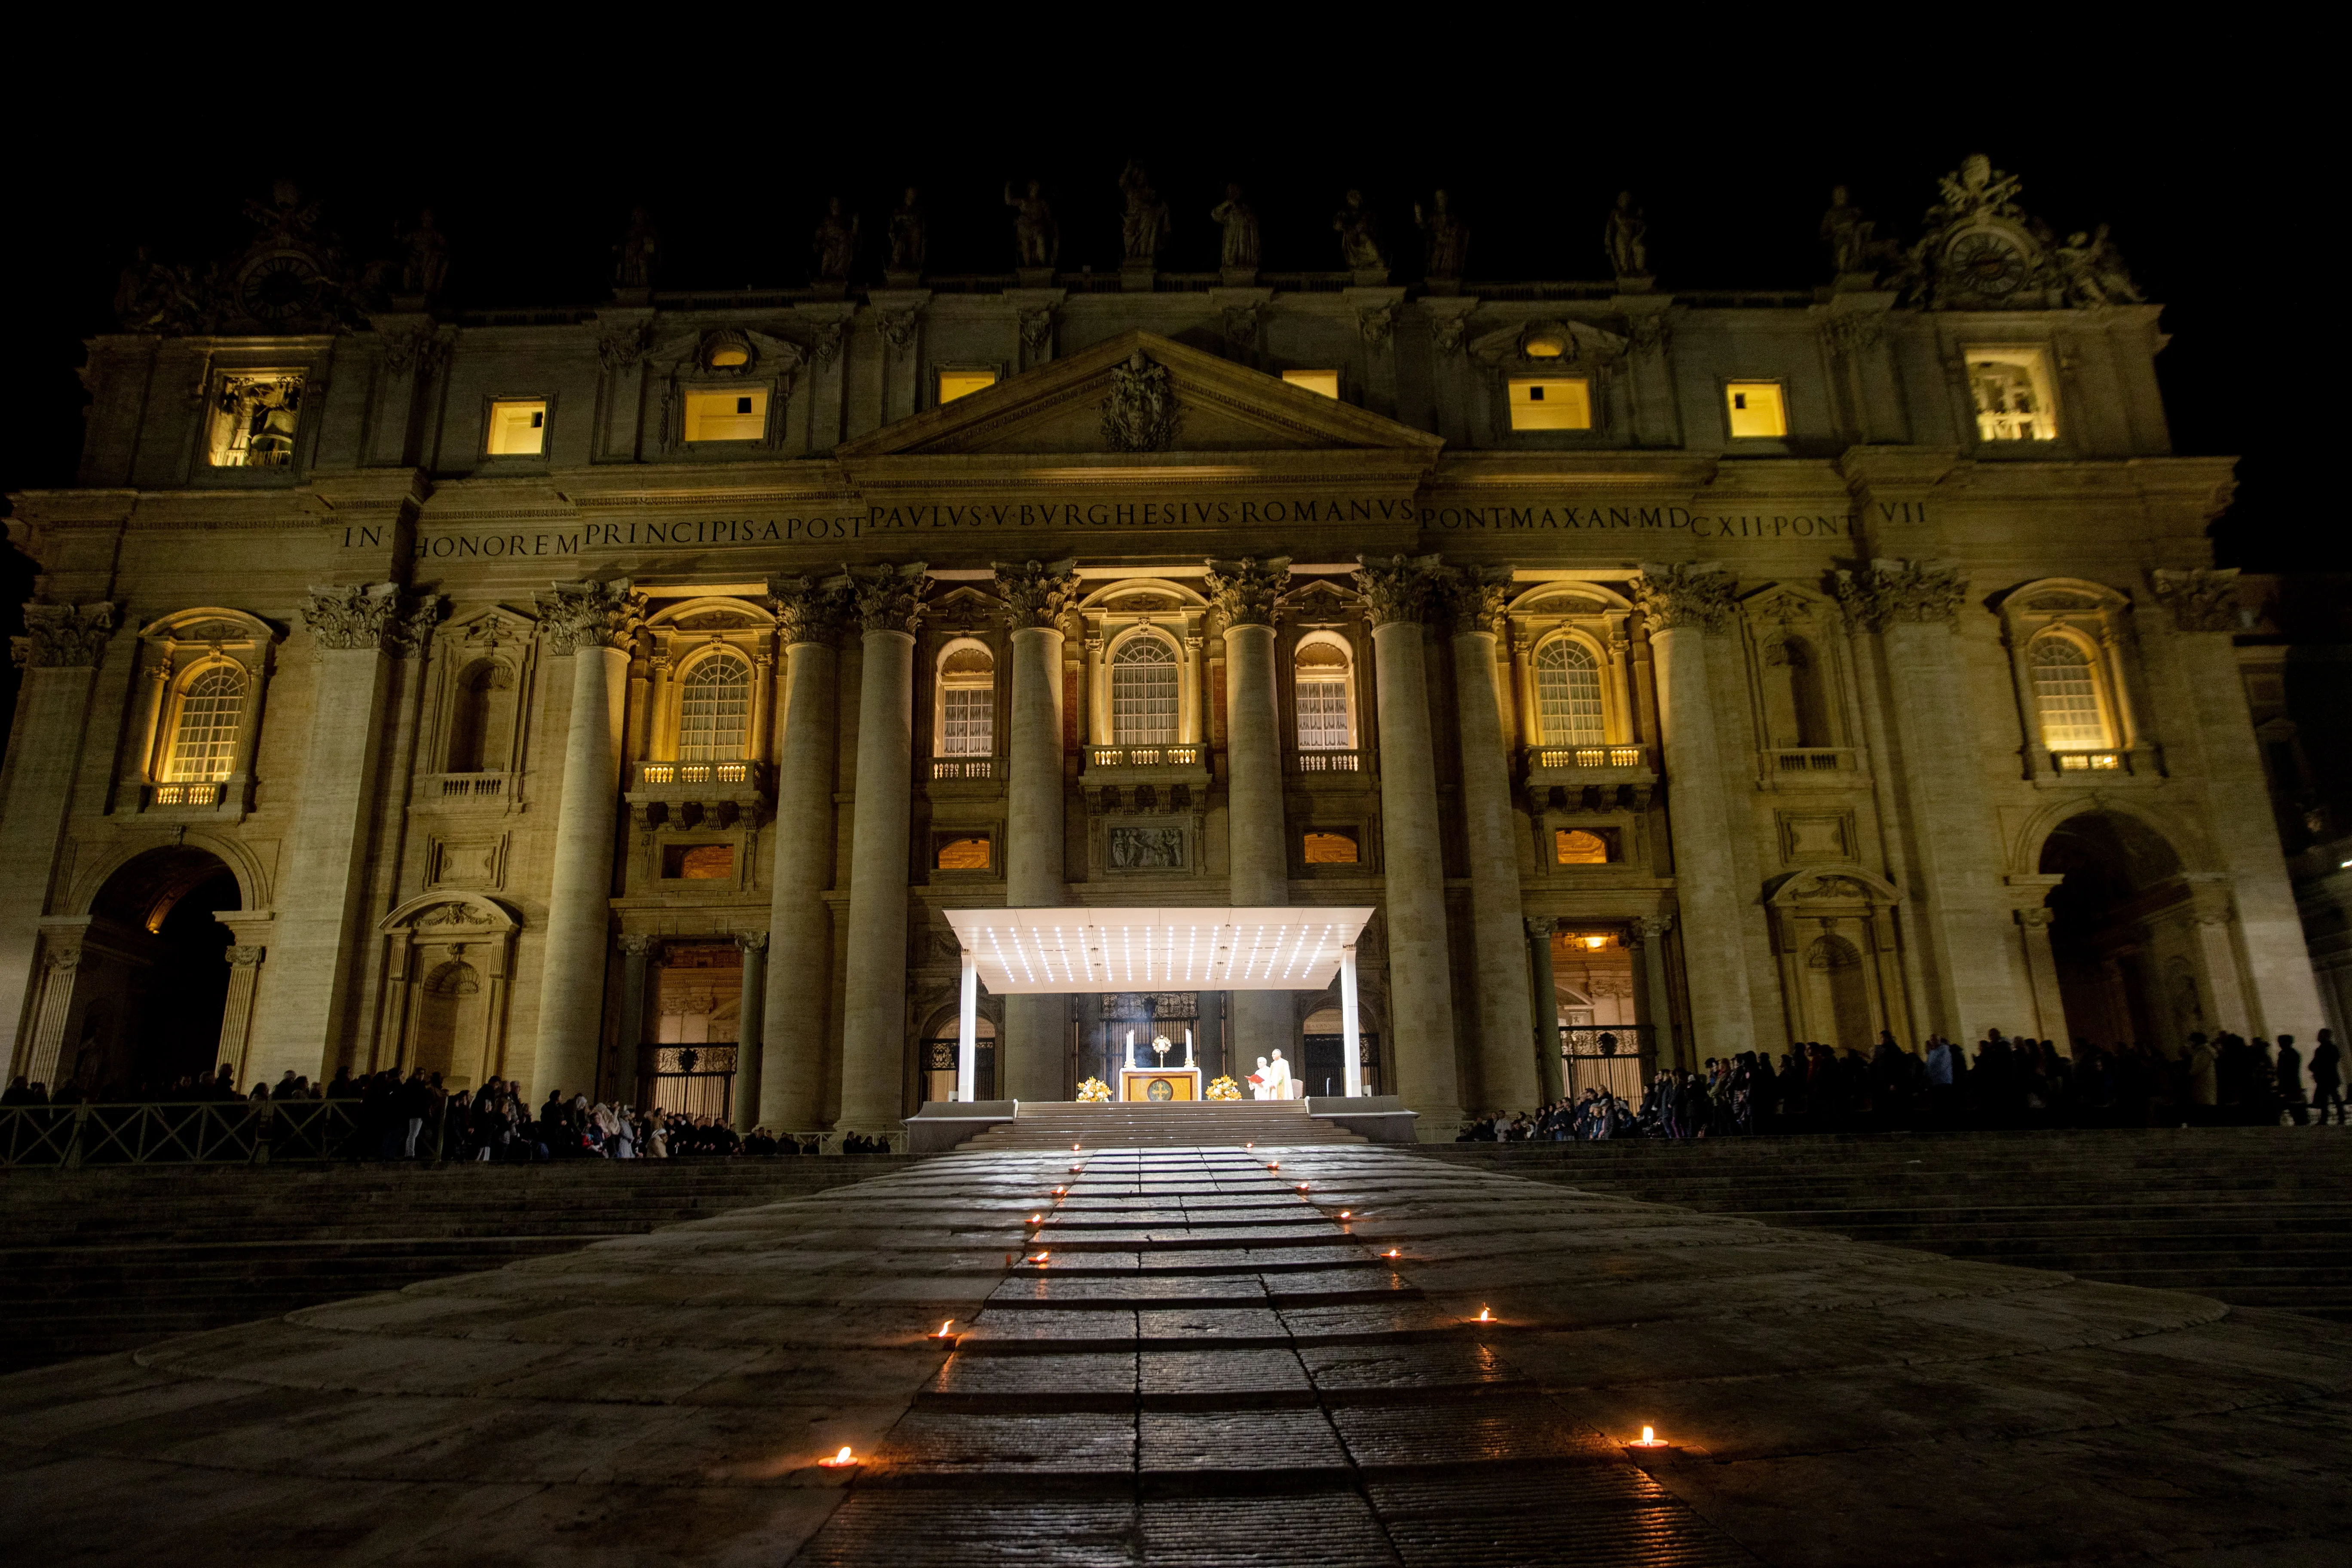 There was a candlelit path to the altar holding the Eucharist during adoration in St. Peter's Square March 14, 2023. Daniel Ibanez/CNA